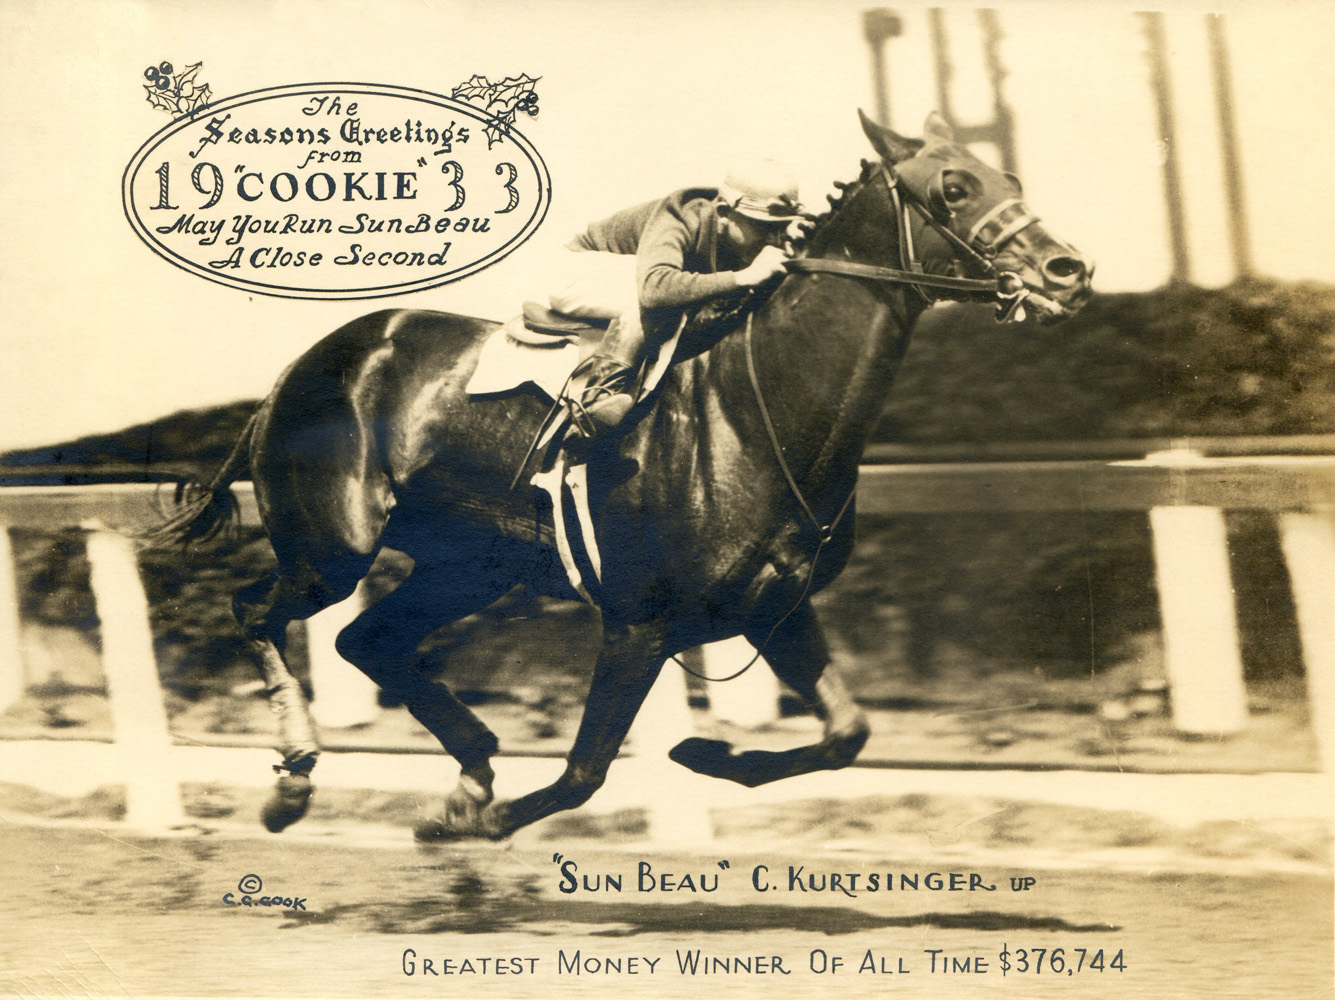 Sun Beau with Charles Kurtsinger up featured in the 1933 "Christmas Cookie" greeting card produced by photographer C. C. Cook (C. C. Cook/Museum Collection)